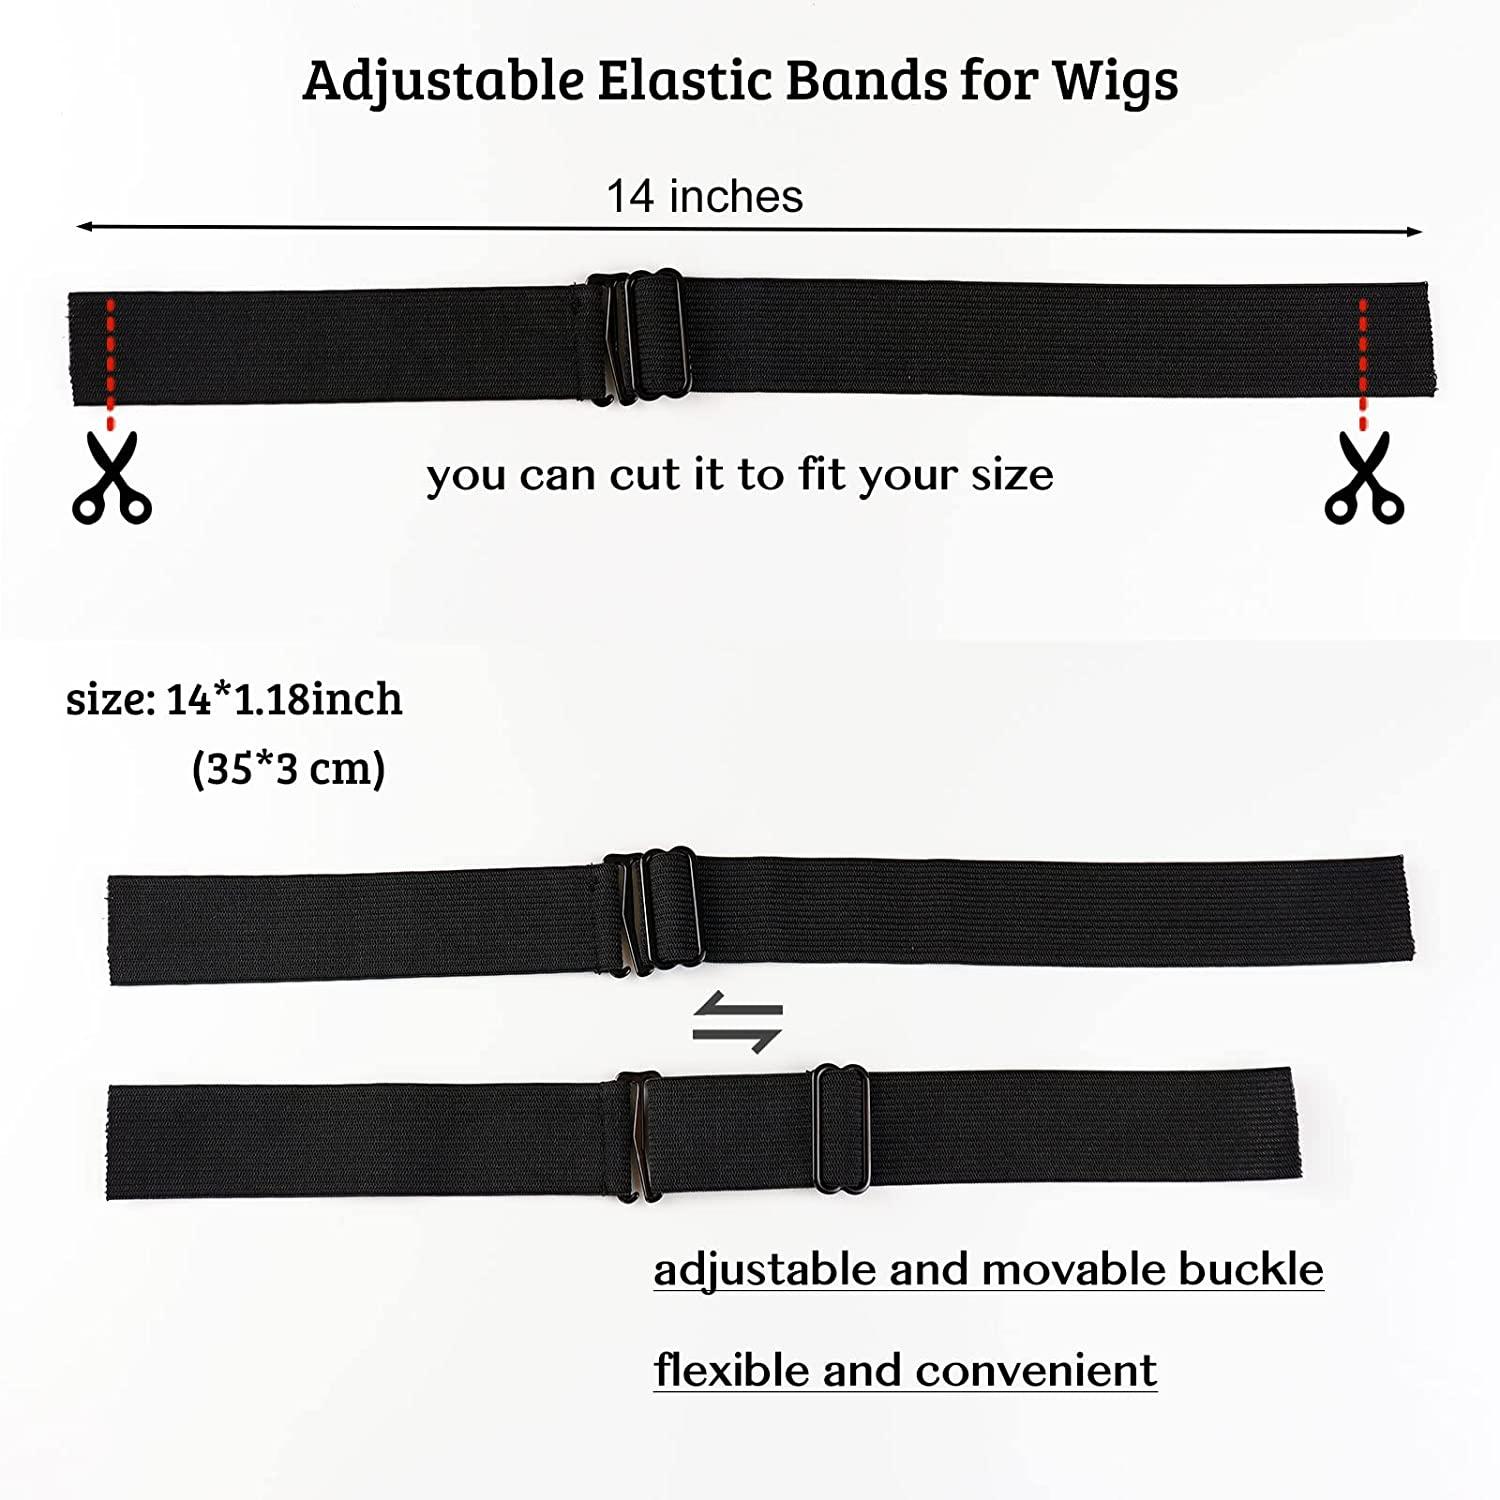 4 Pcs/set Adjustable Elastic Band for Wigs Making Wig Accessories